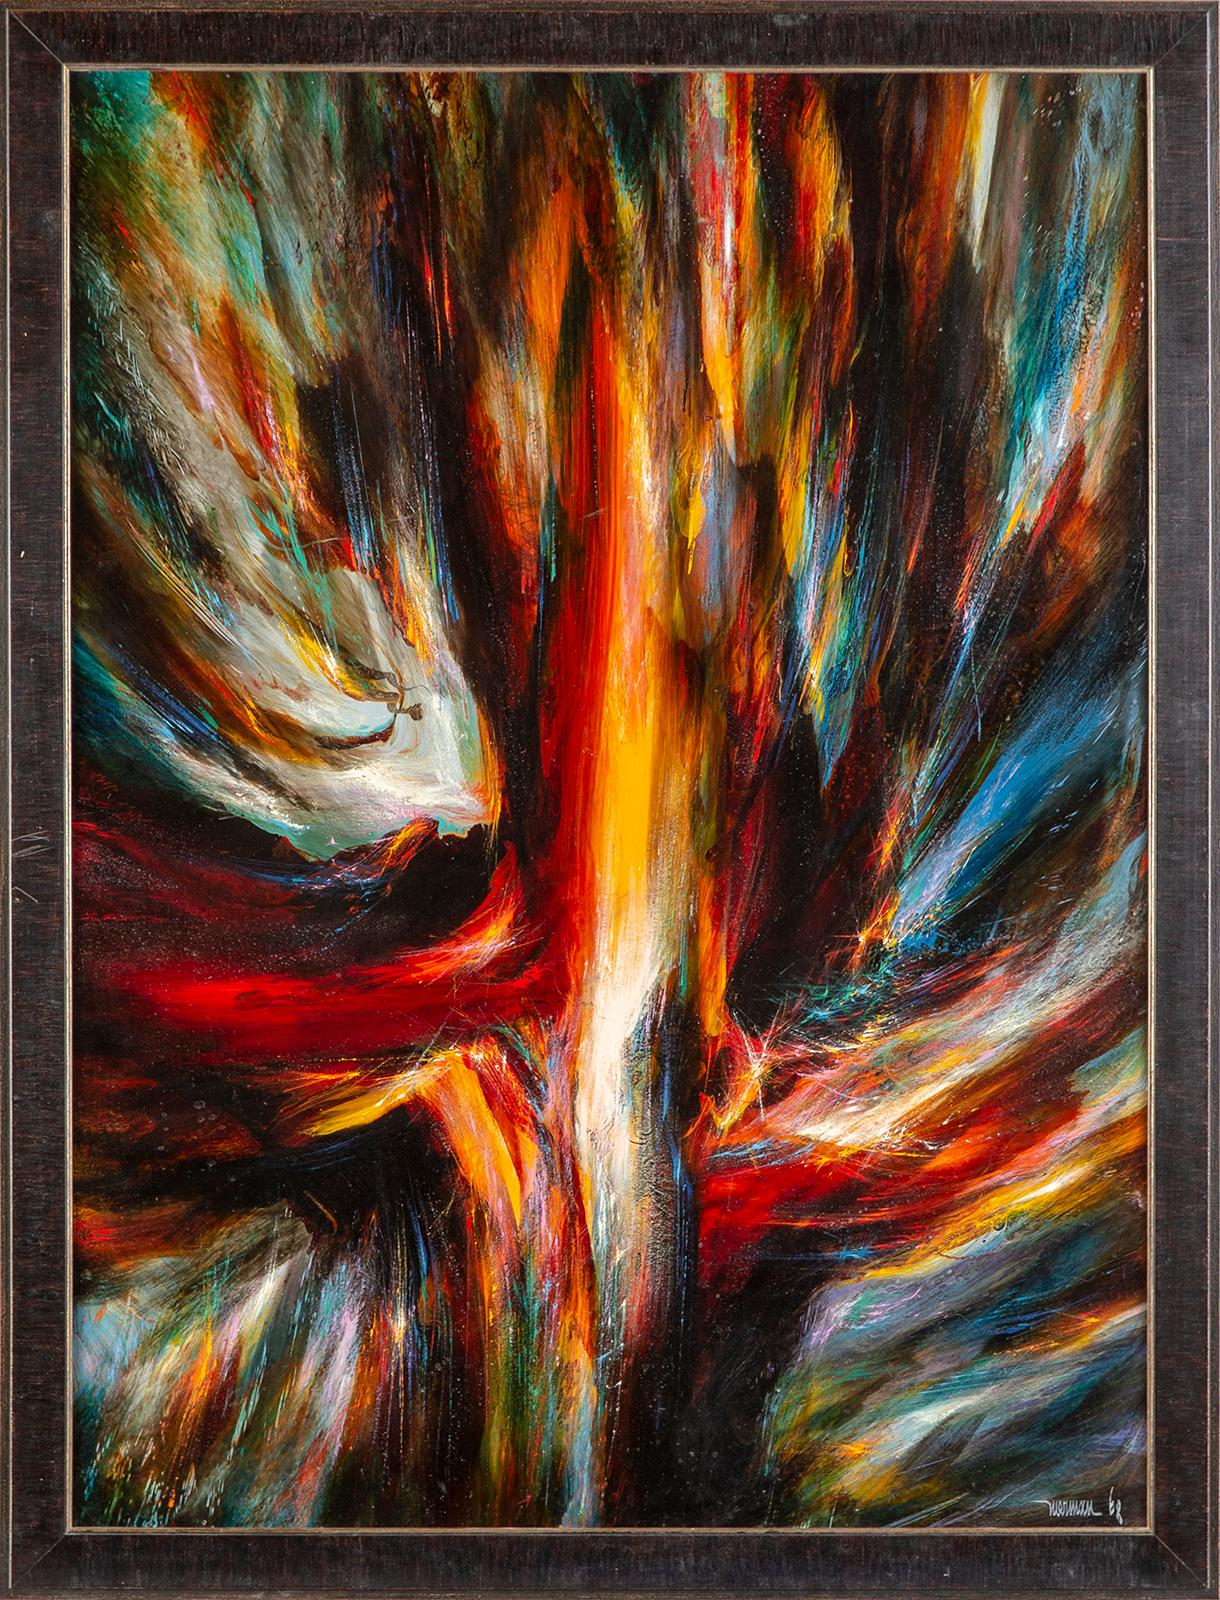 Artist: Leonardo Nierman
Description: "untitled"
Medium: Oil on Masonite Board
Dimensions: 48" x 36"
Framed: 49" x 37"
Signature: Signed by the artist
Provenance: Includes Gallery COA

Another amazing Nierman offered by Modern Artifact. We work hard